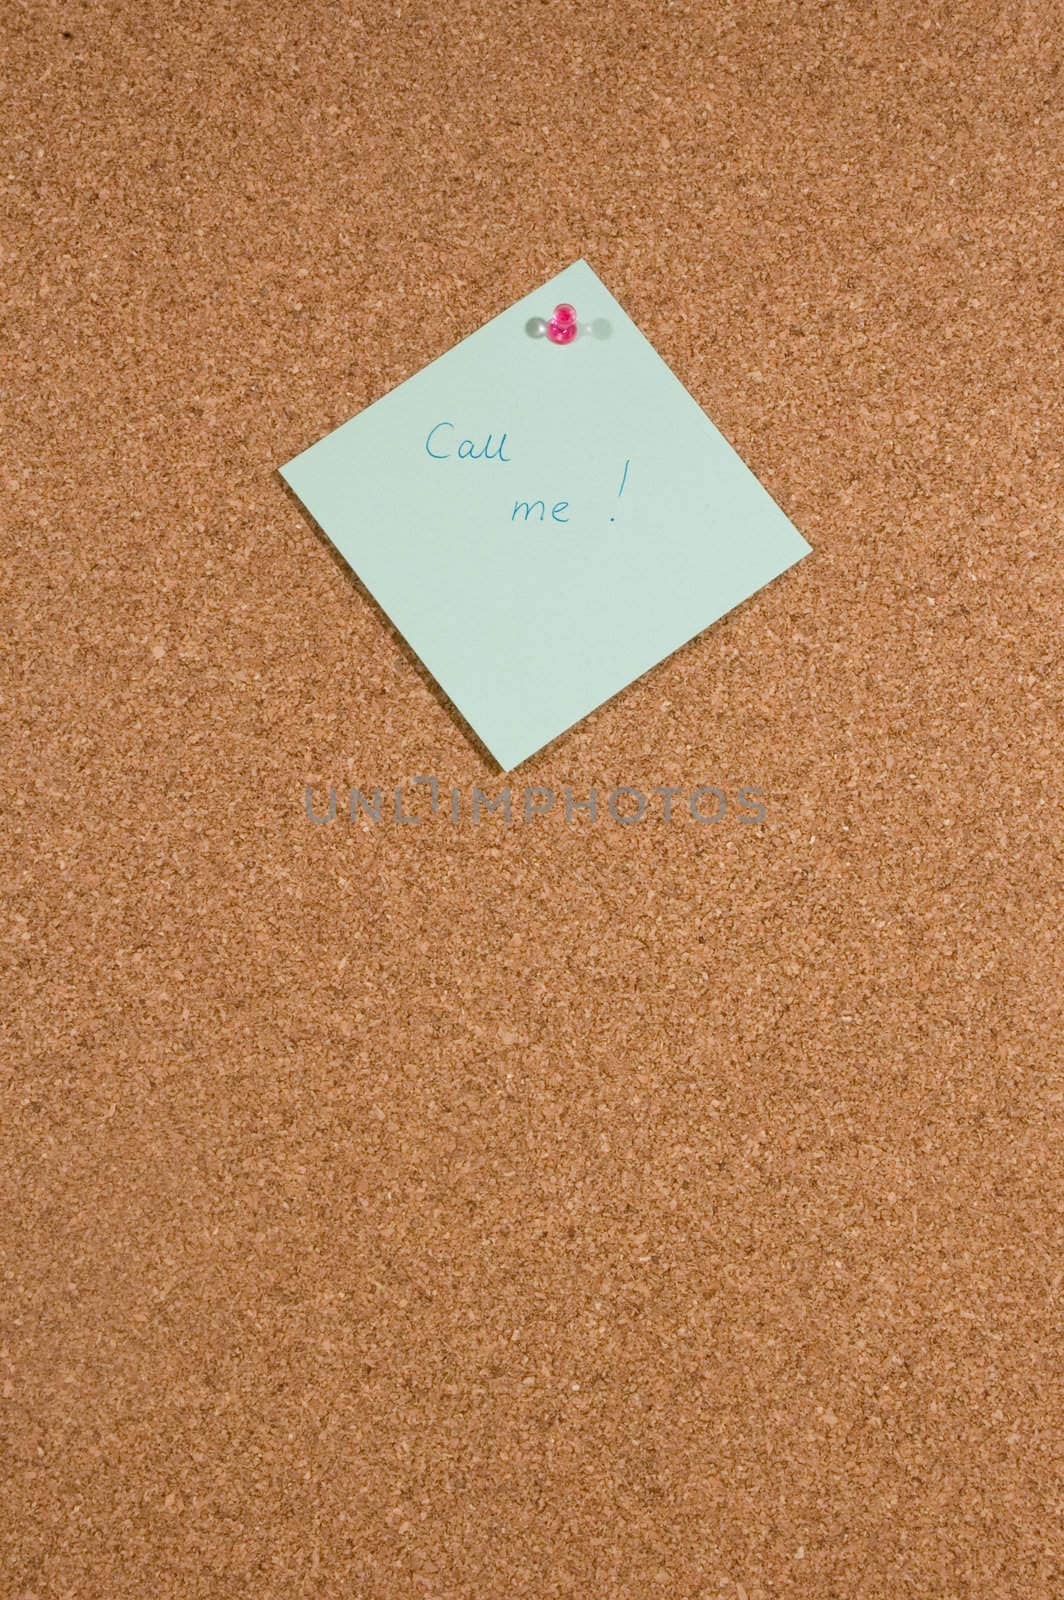 Memo board with the message call me by ladyminnie